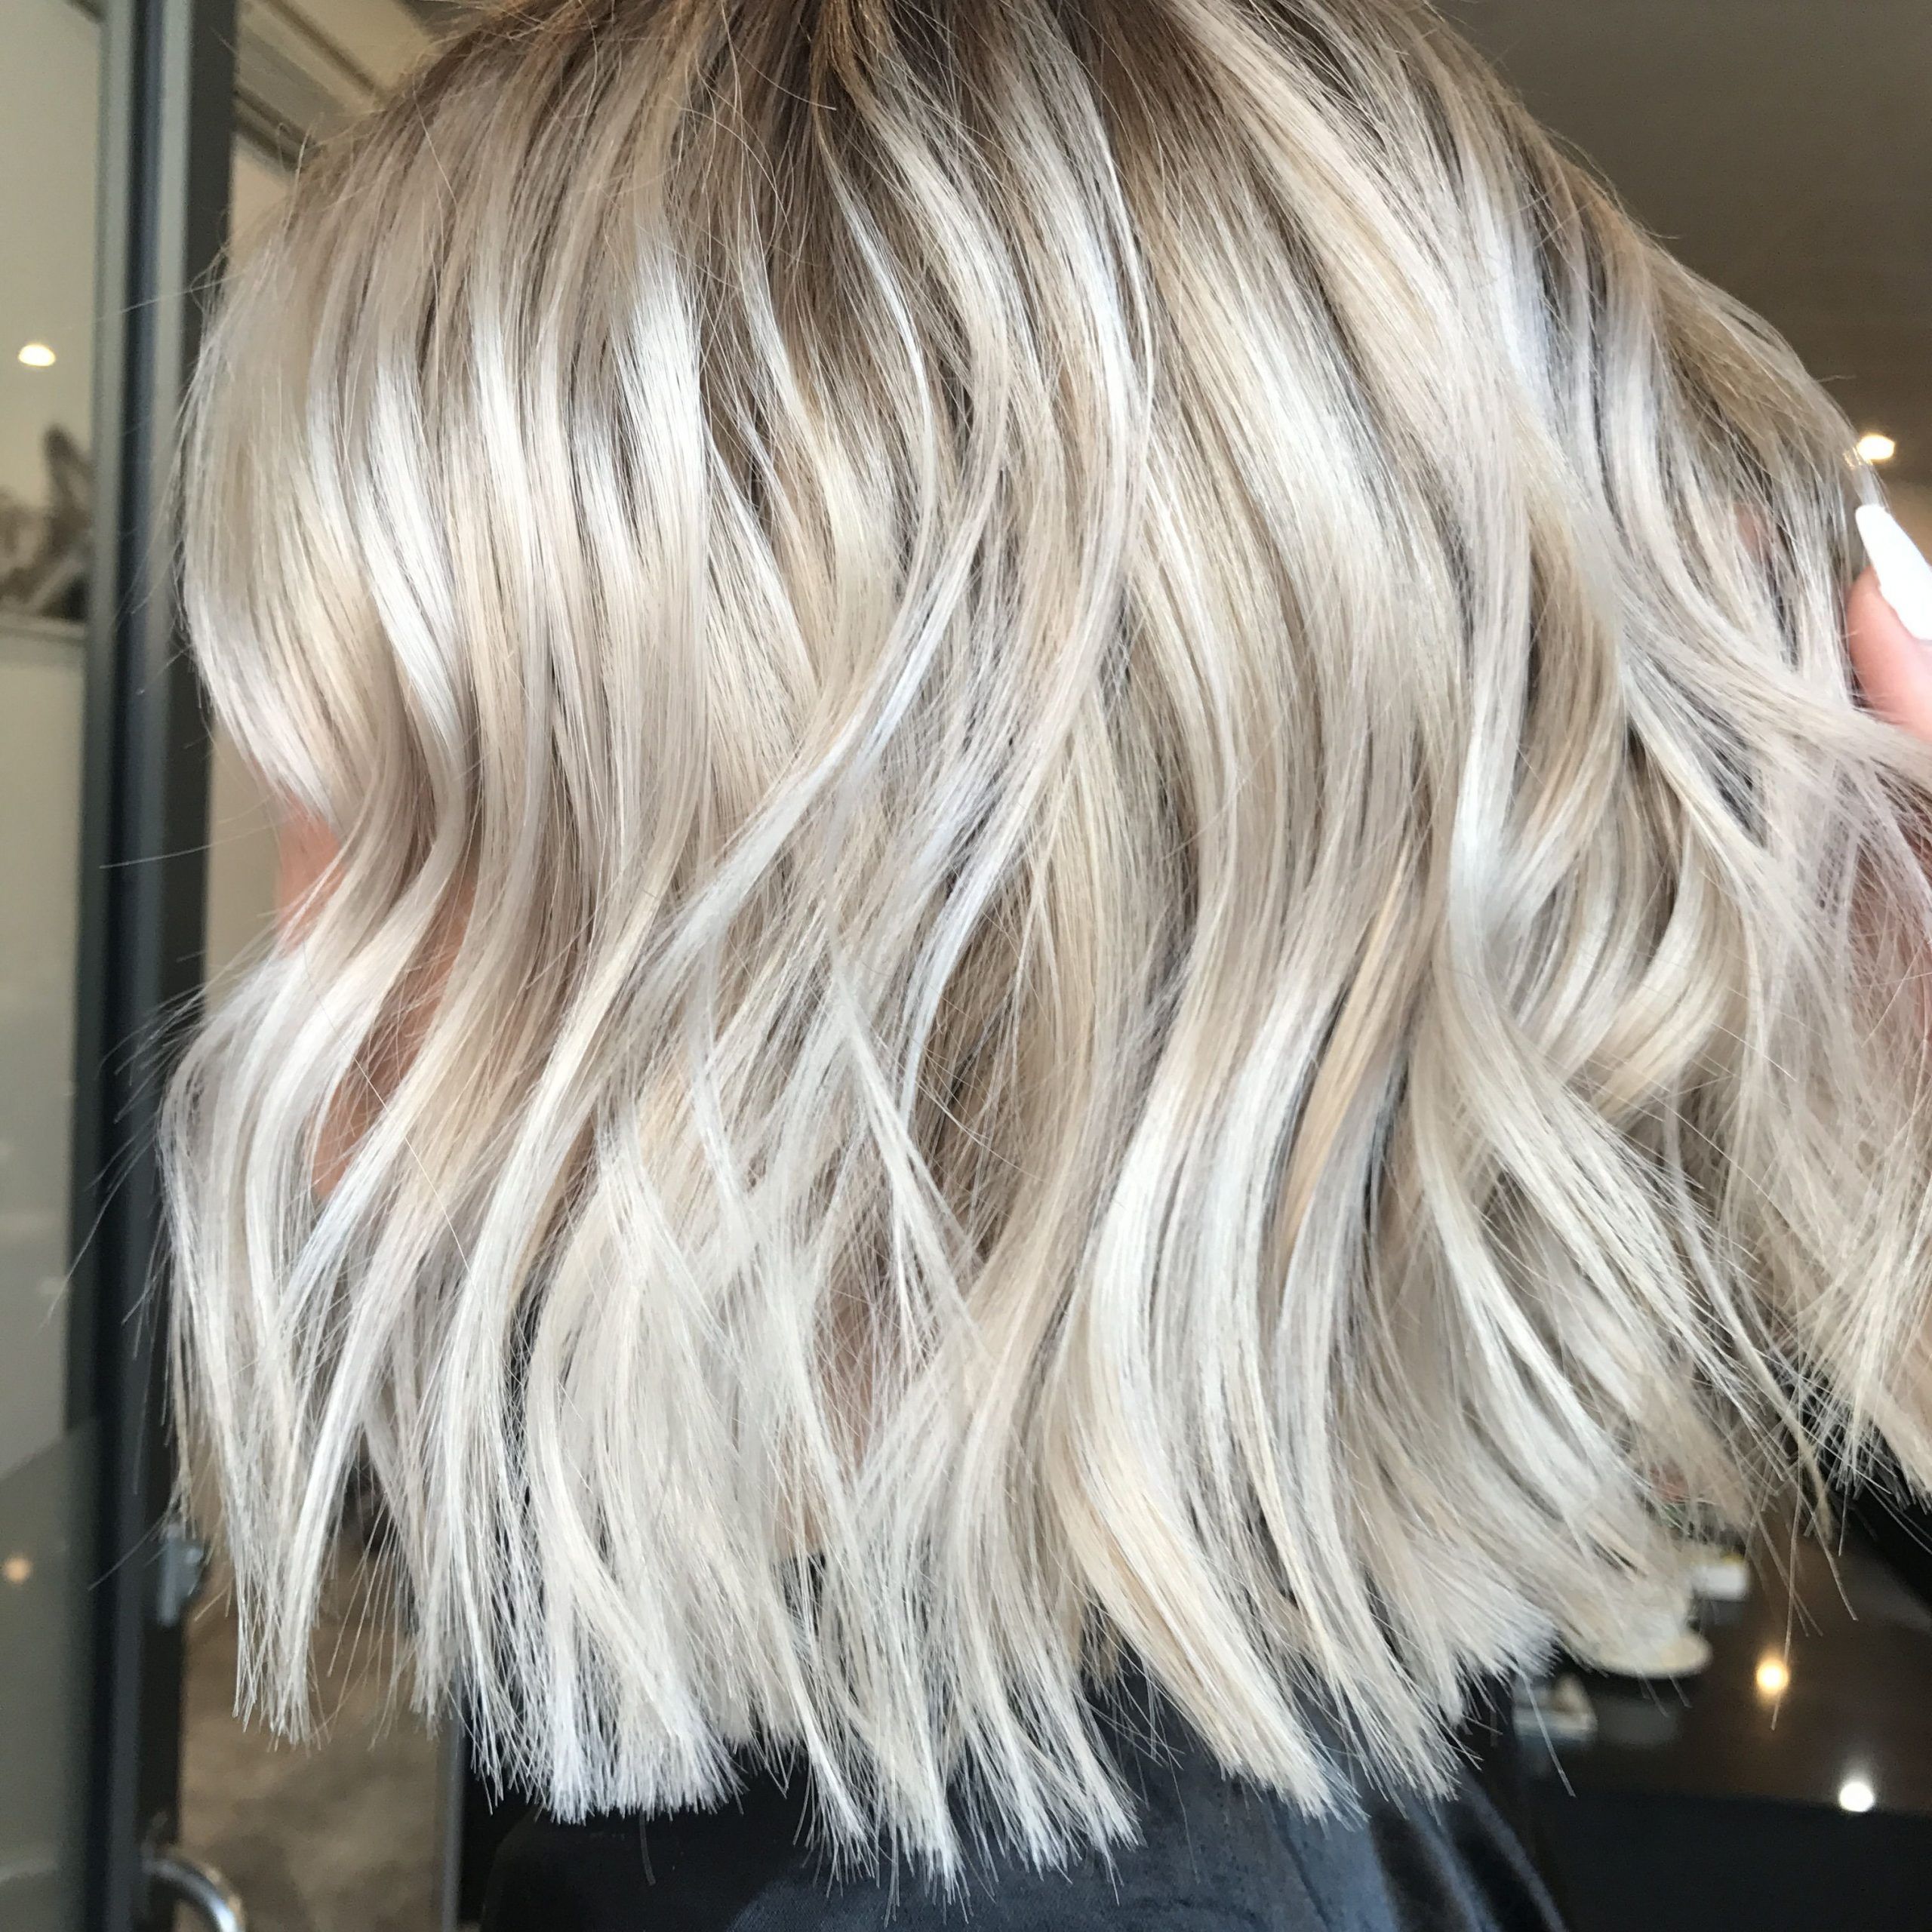 Most Current Textured Bronde Bob Hairstyles With Silver Balayage Within Blonde Balayage, Long Hair, Cool Girl Hair ✌️ Lived In (View 3 of 20)